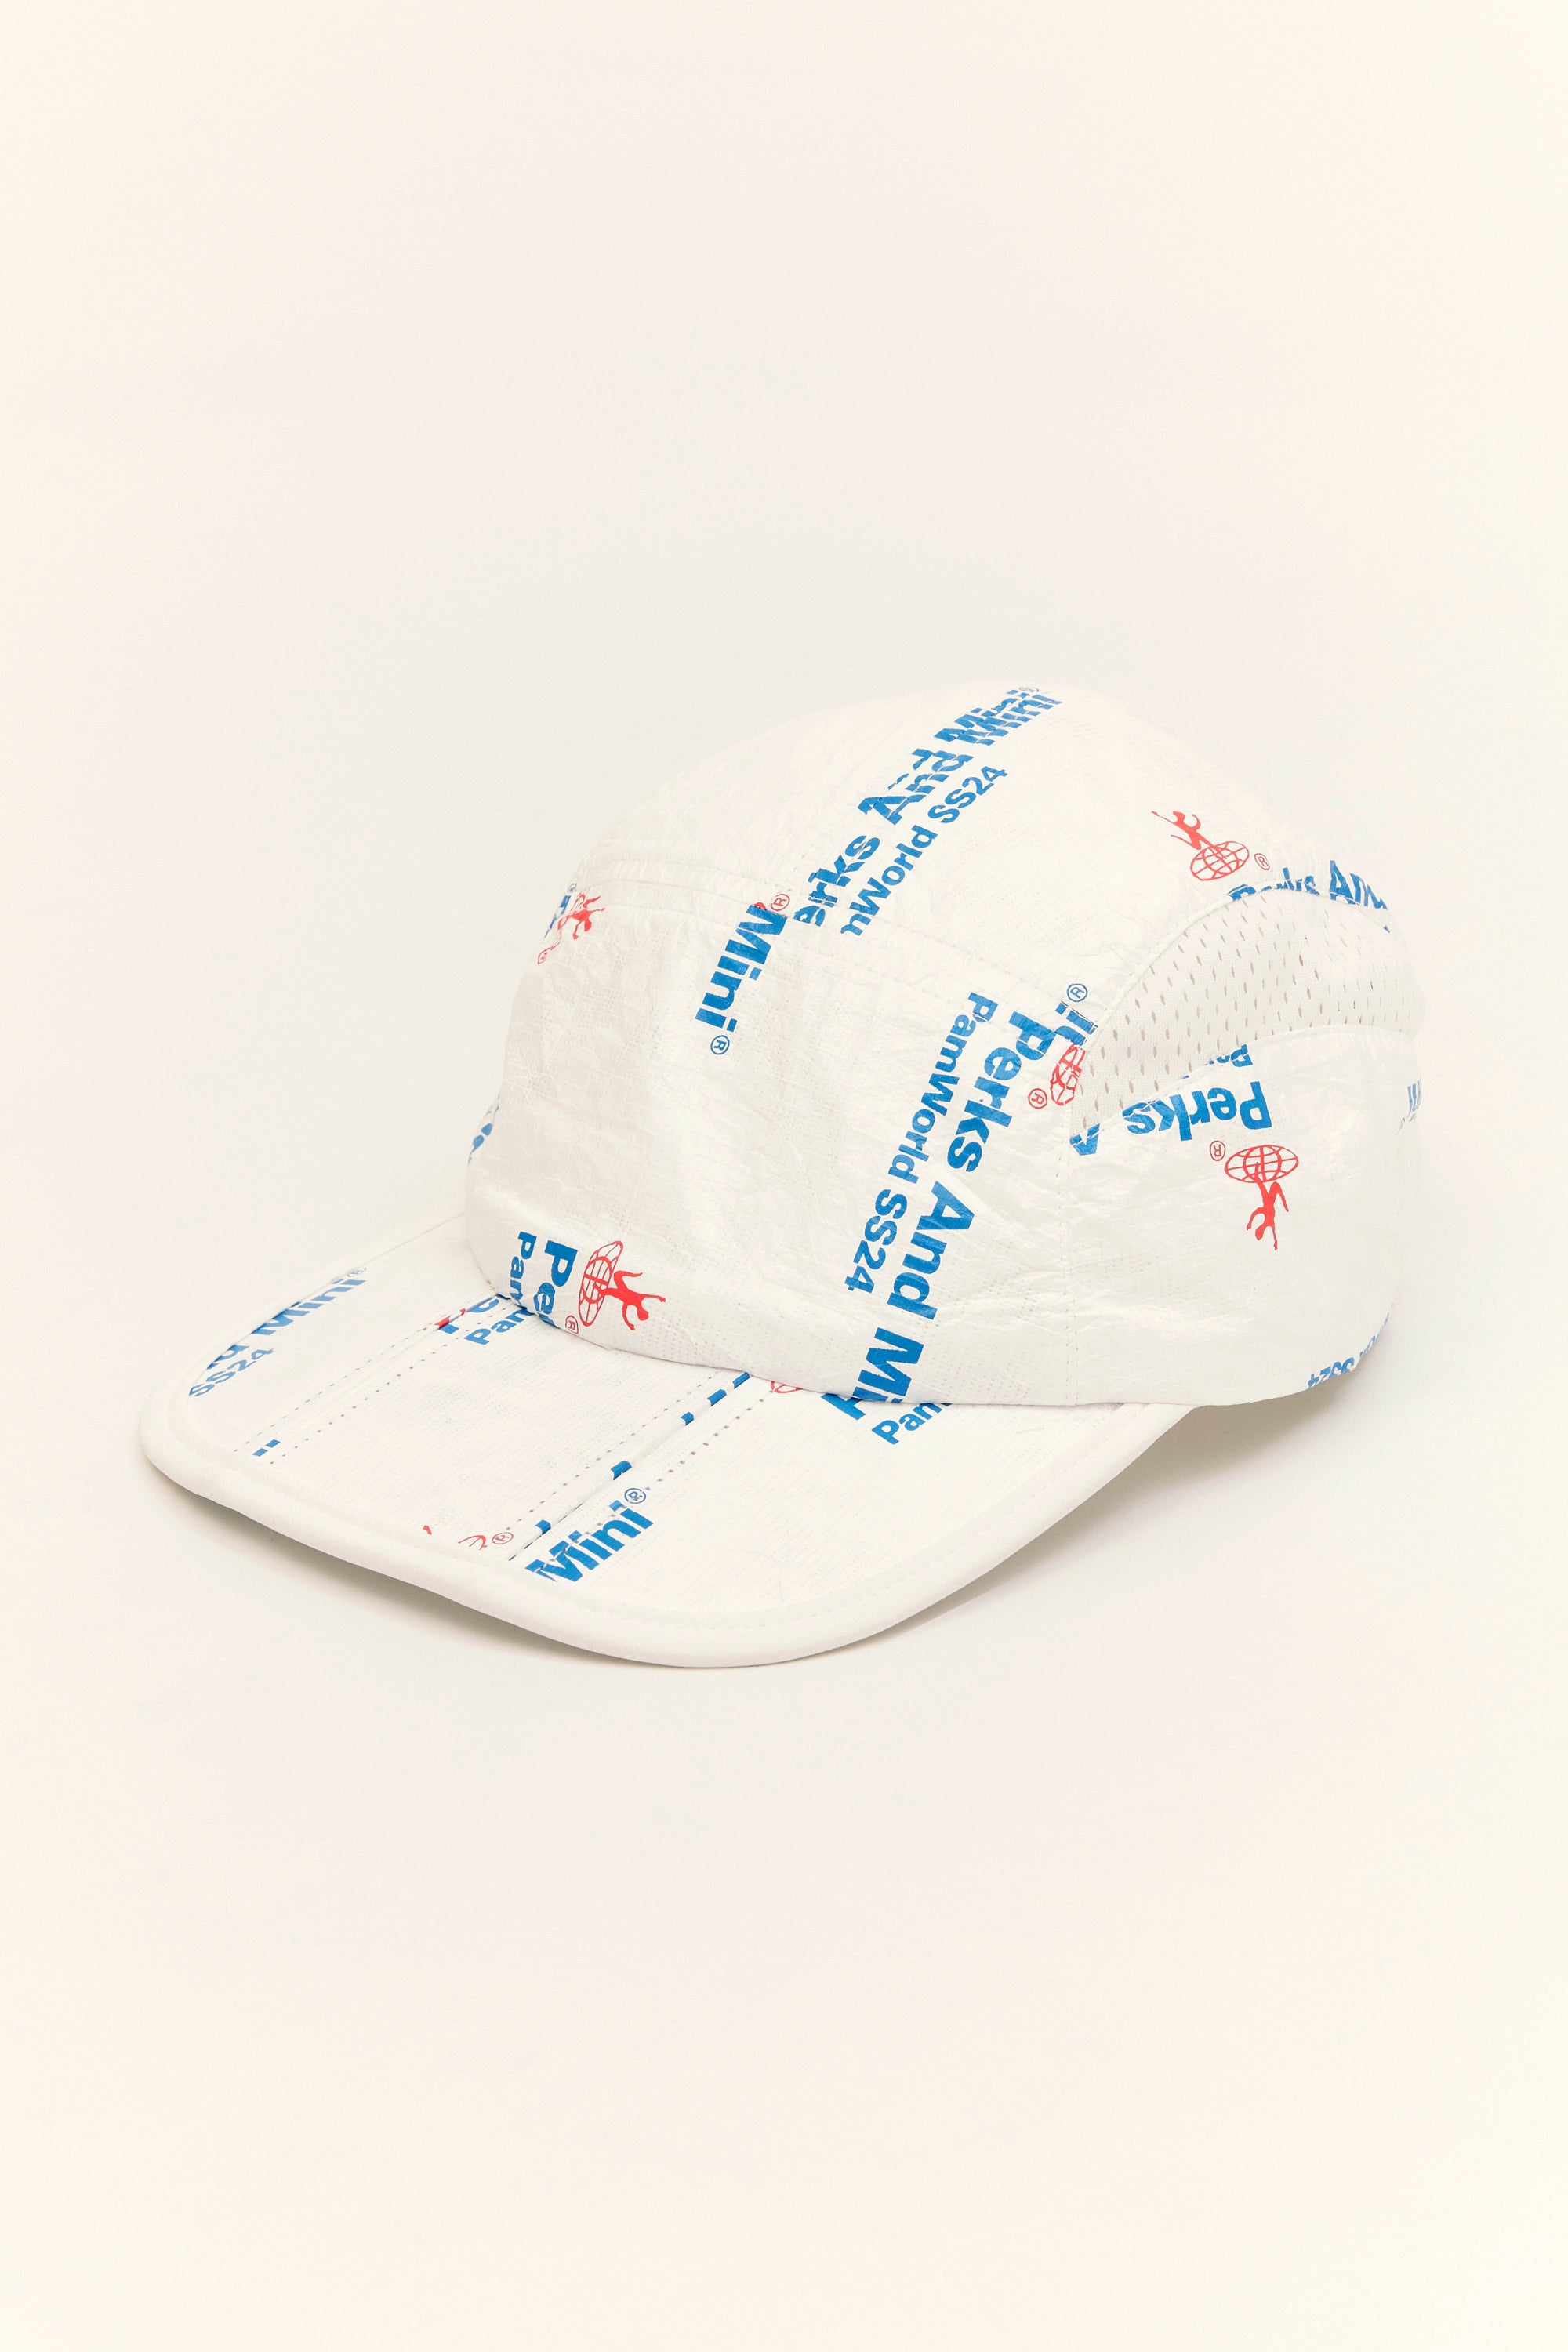 The WRAPPING FOLDABLE CAP  available online with global shipping, and in PAM Stores Melbourne and Sydney.